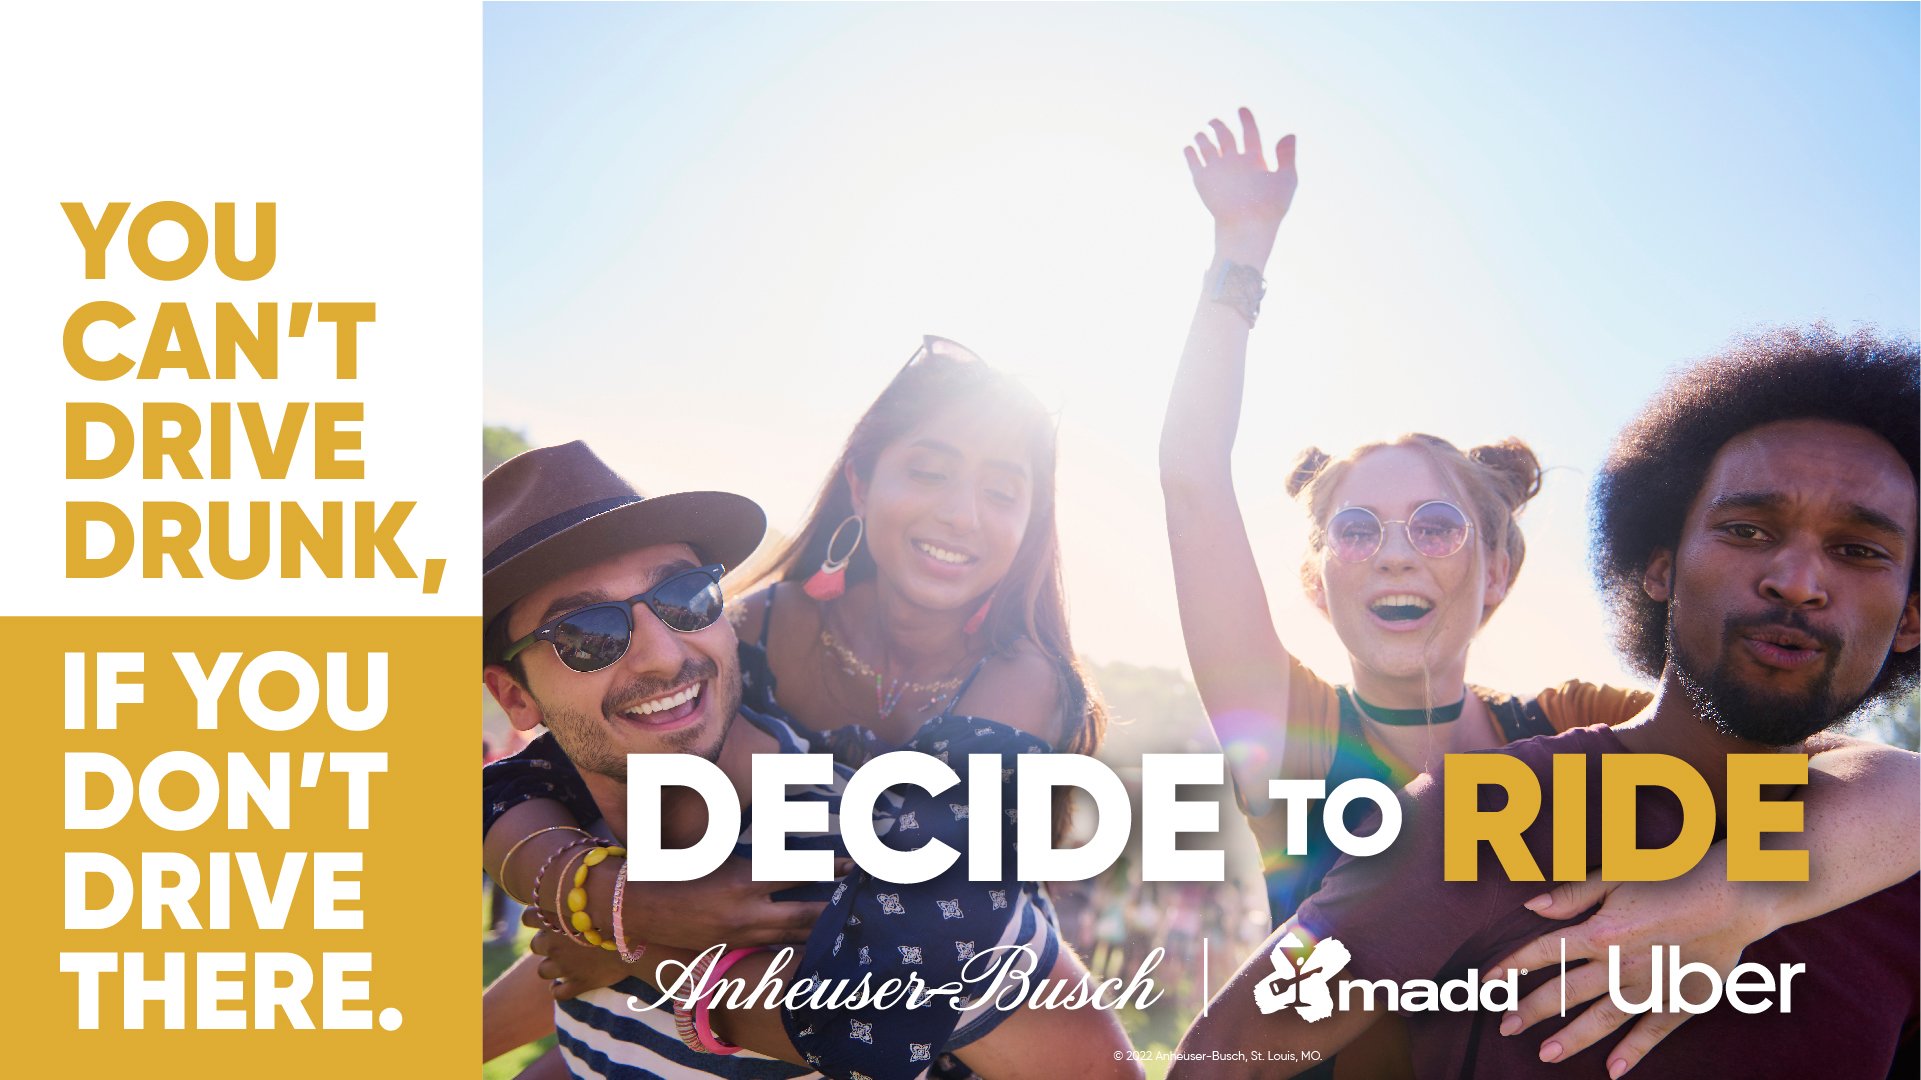 Anheuser-Busch, MADD, and Uber Launch ‘Decide To Ride’ Campaign on College Campuses to Encourage 21+ Fans to Plan Ahead for Sober Rides on Game Days 